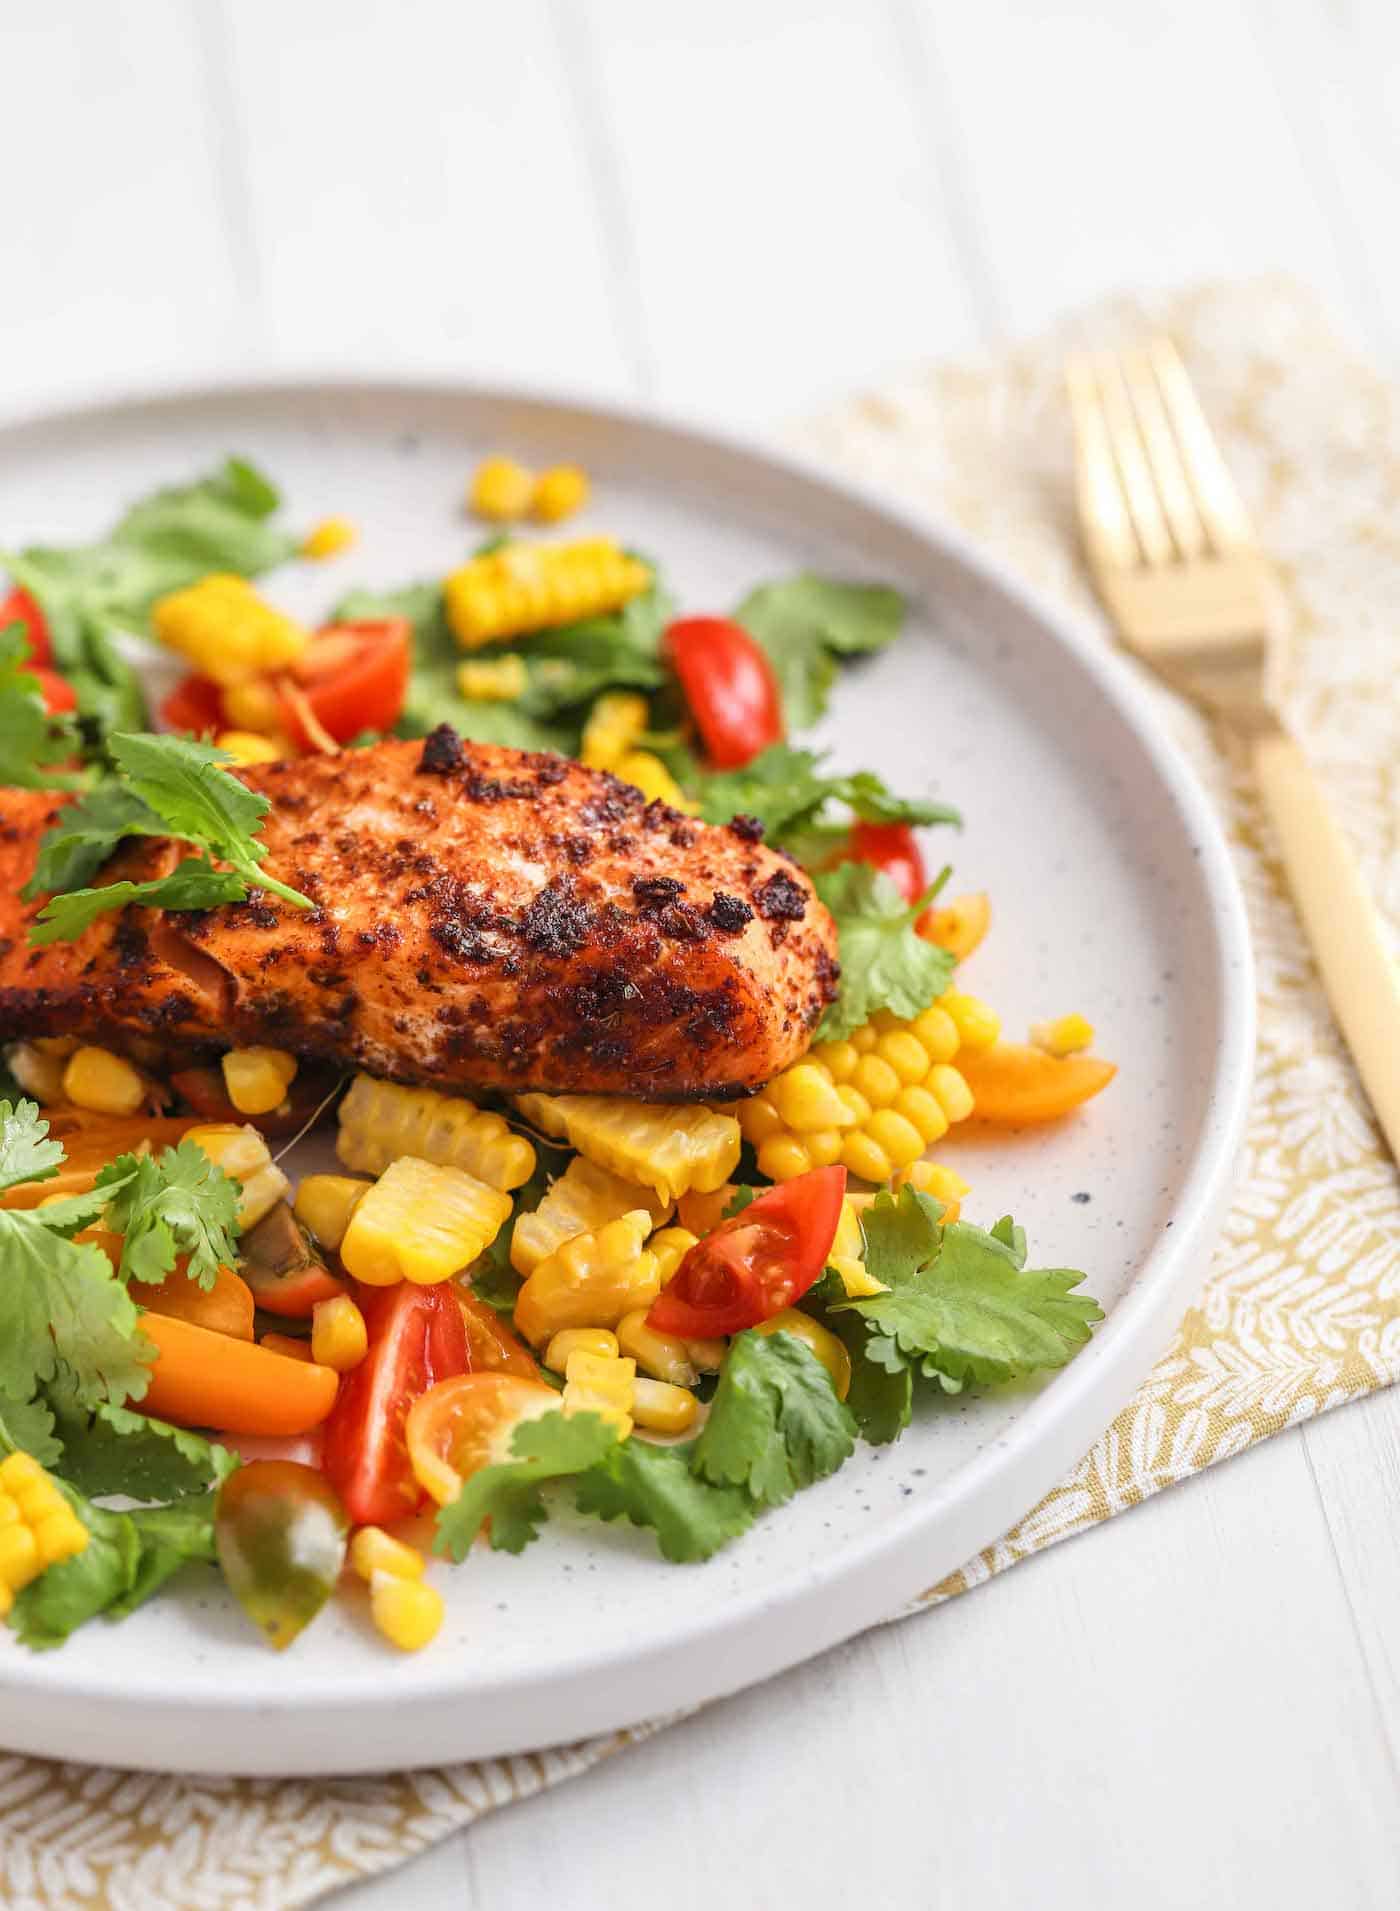 salmon served with salad and corn